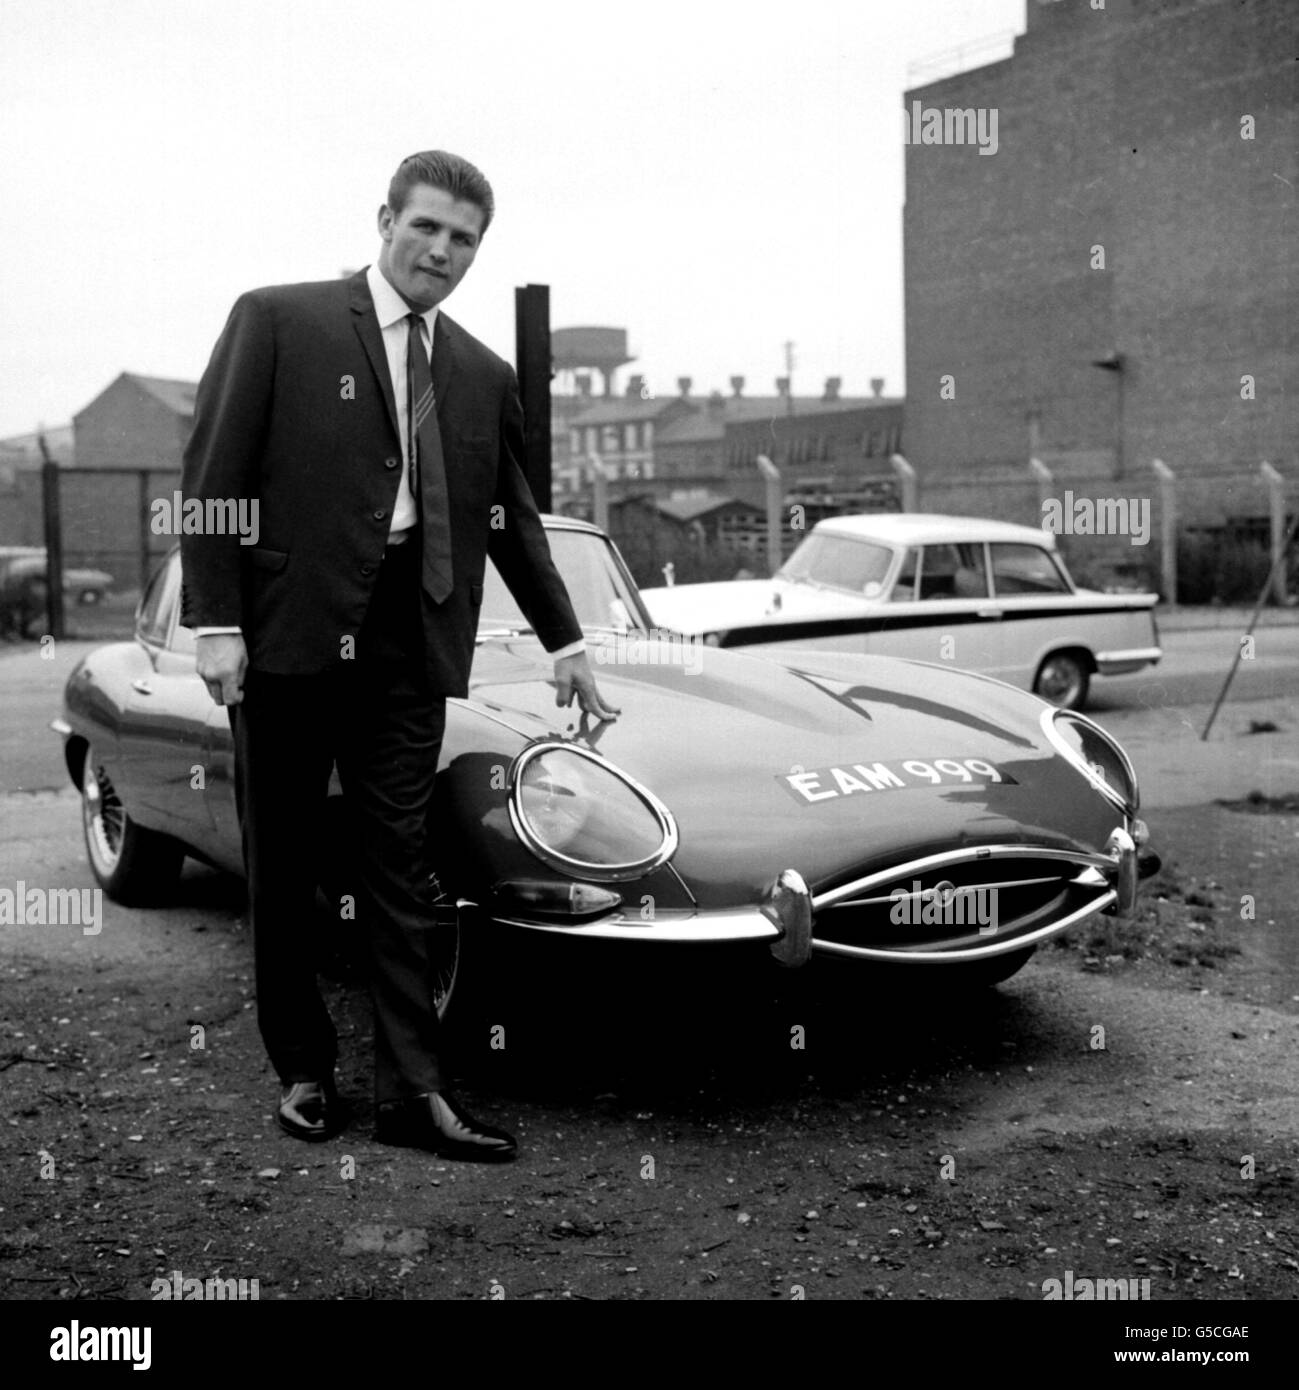 1963: It's one thing owning a brand new E-Type Jaguar Sports car and quite another thing not being able to drive it. That's the lot of heavyweight boxer Johnny Prescott who now sits in the passenger seat on the orders of a promoter anxious to safeguard his investment. Stock Photo